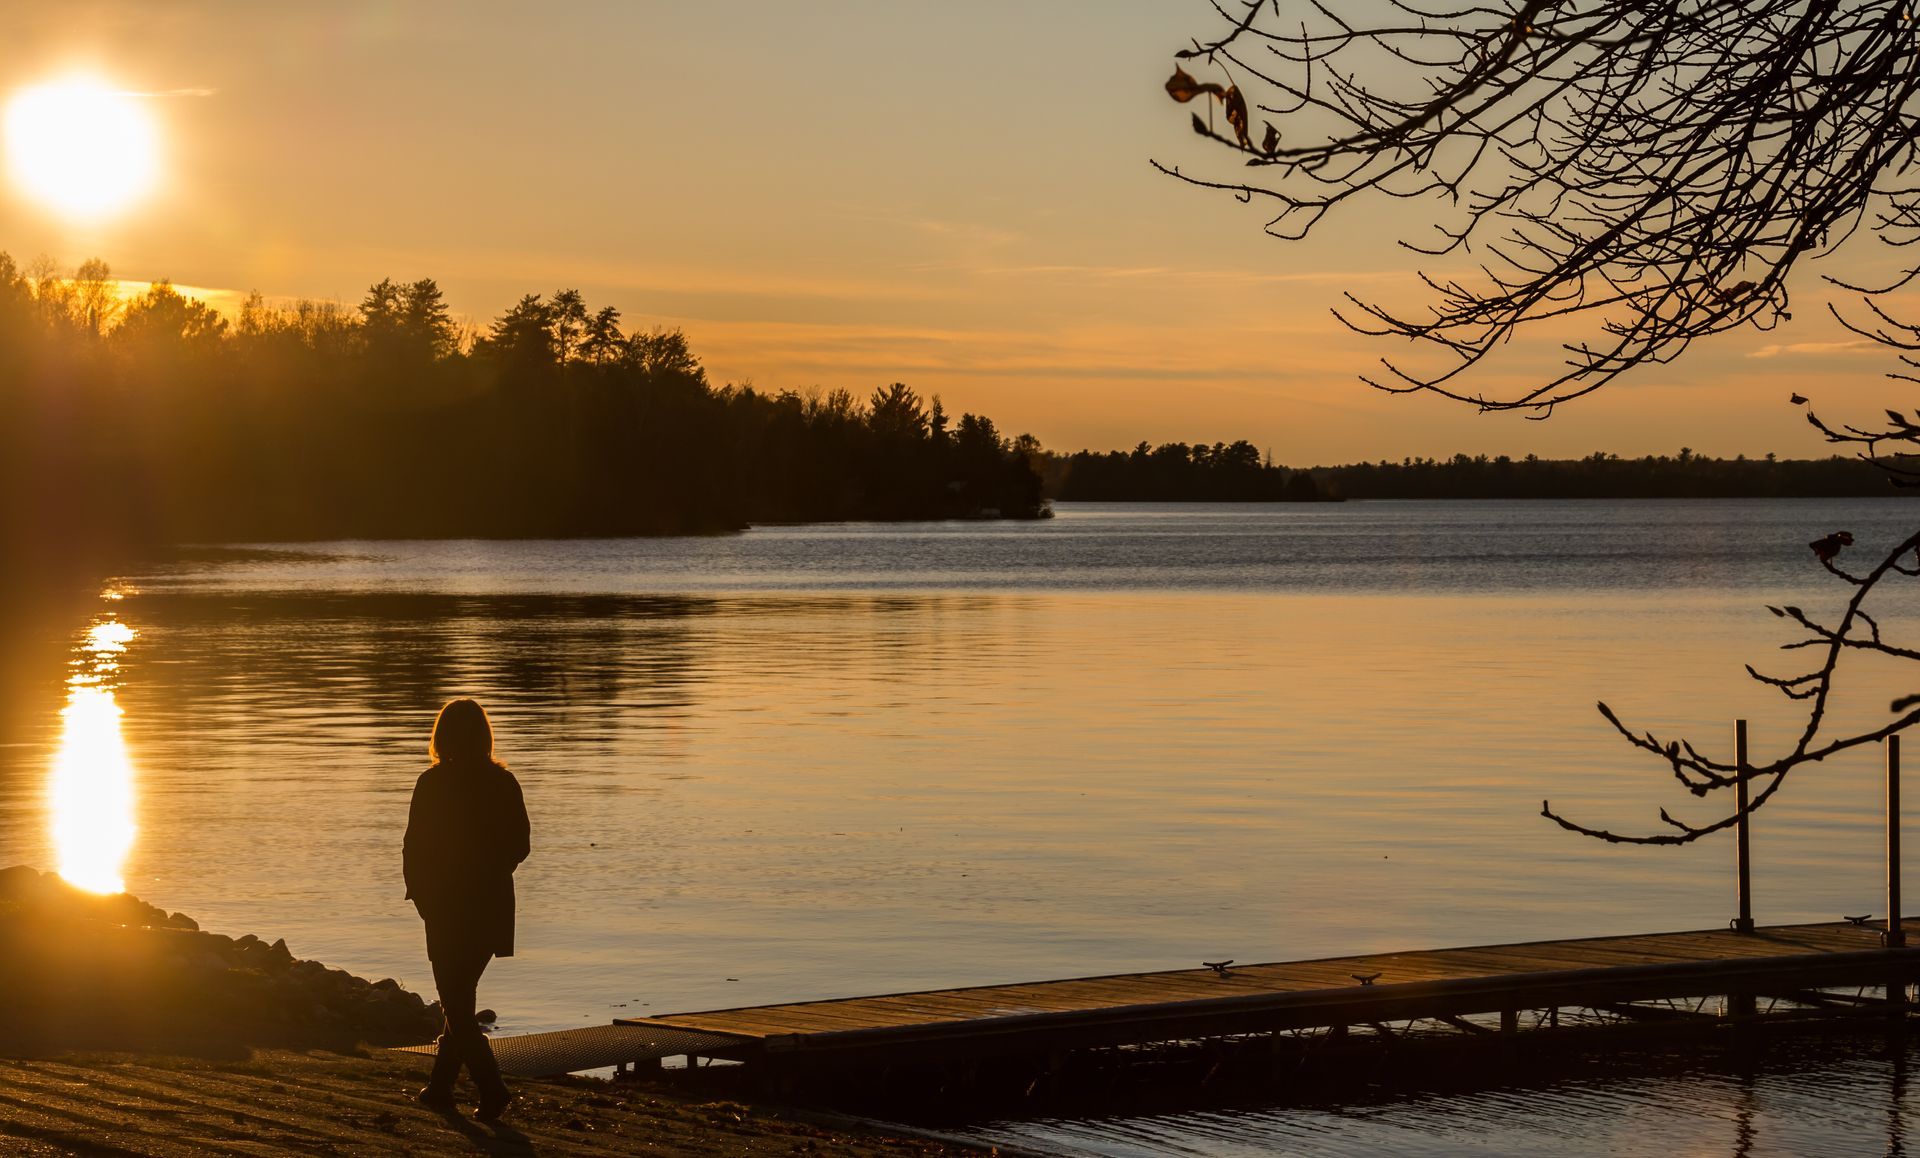 a person is standing on a dock near a lake at sunset .